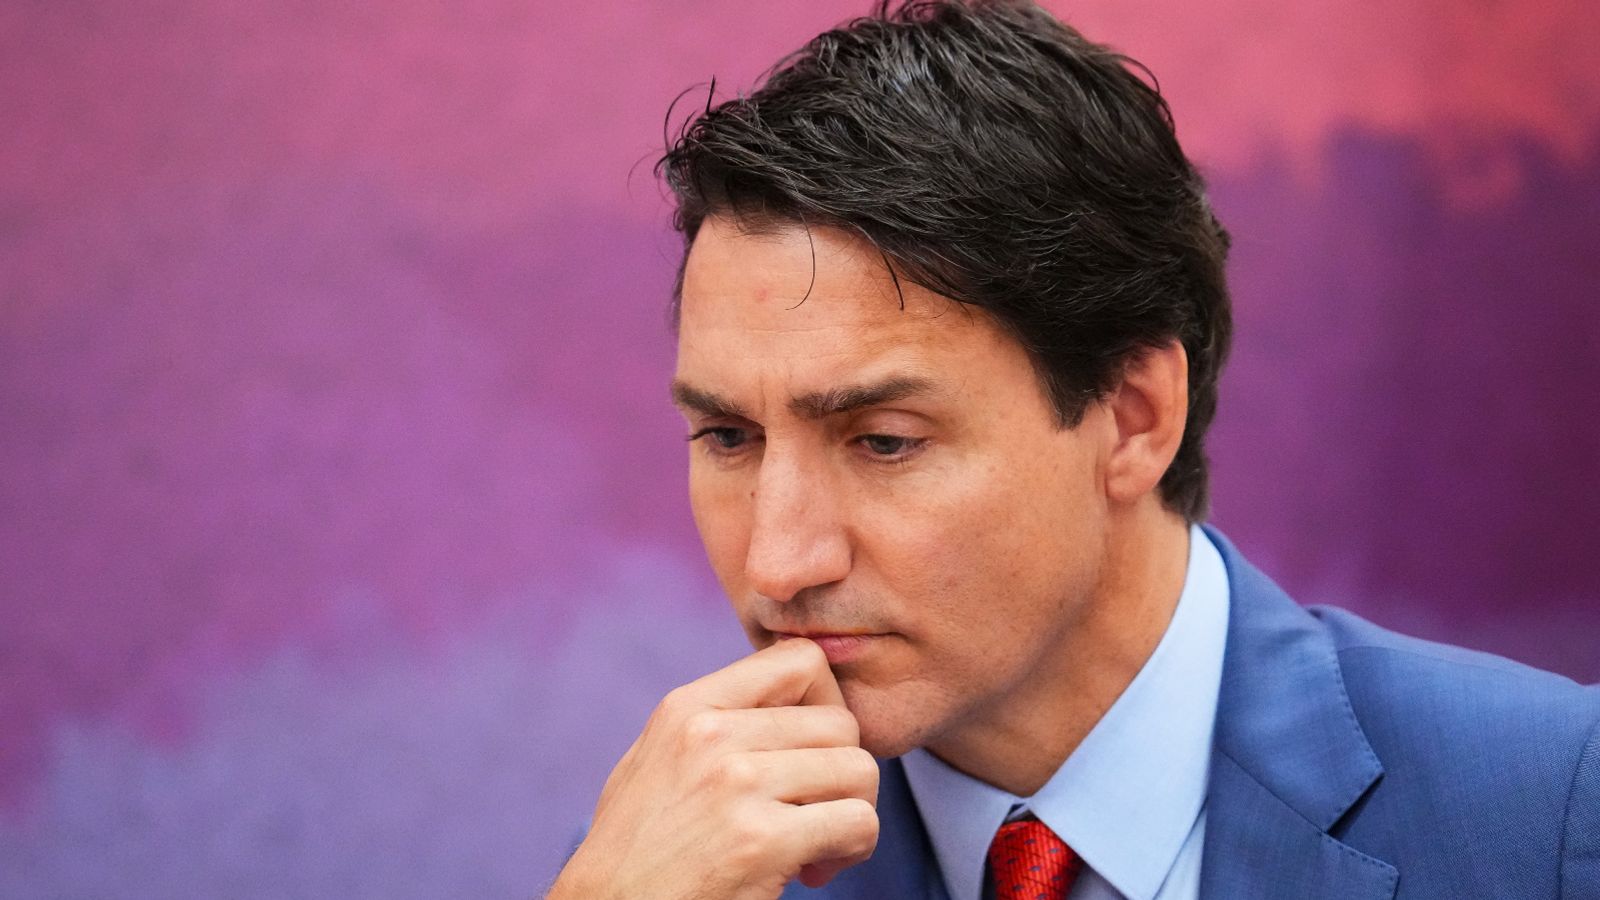 Justin Trudeau: Canada's PM stranded in India after his plane suffers 'technical issues'